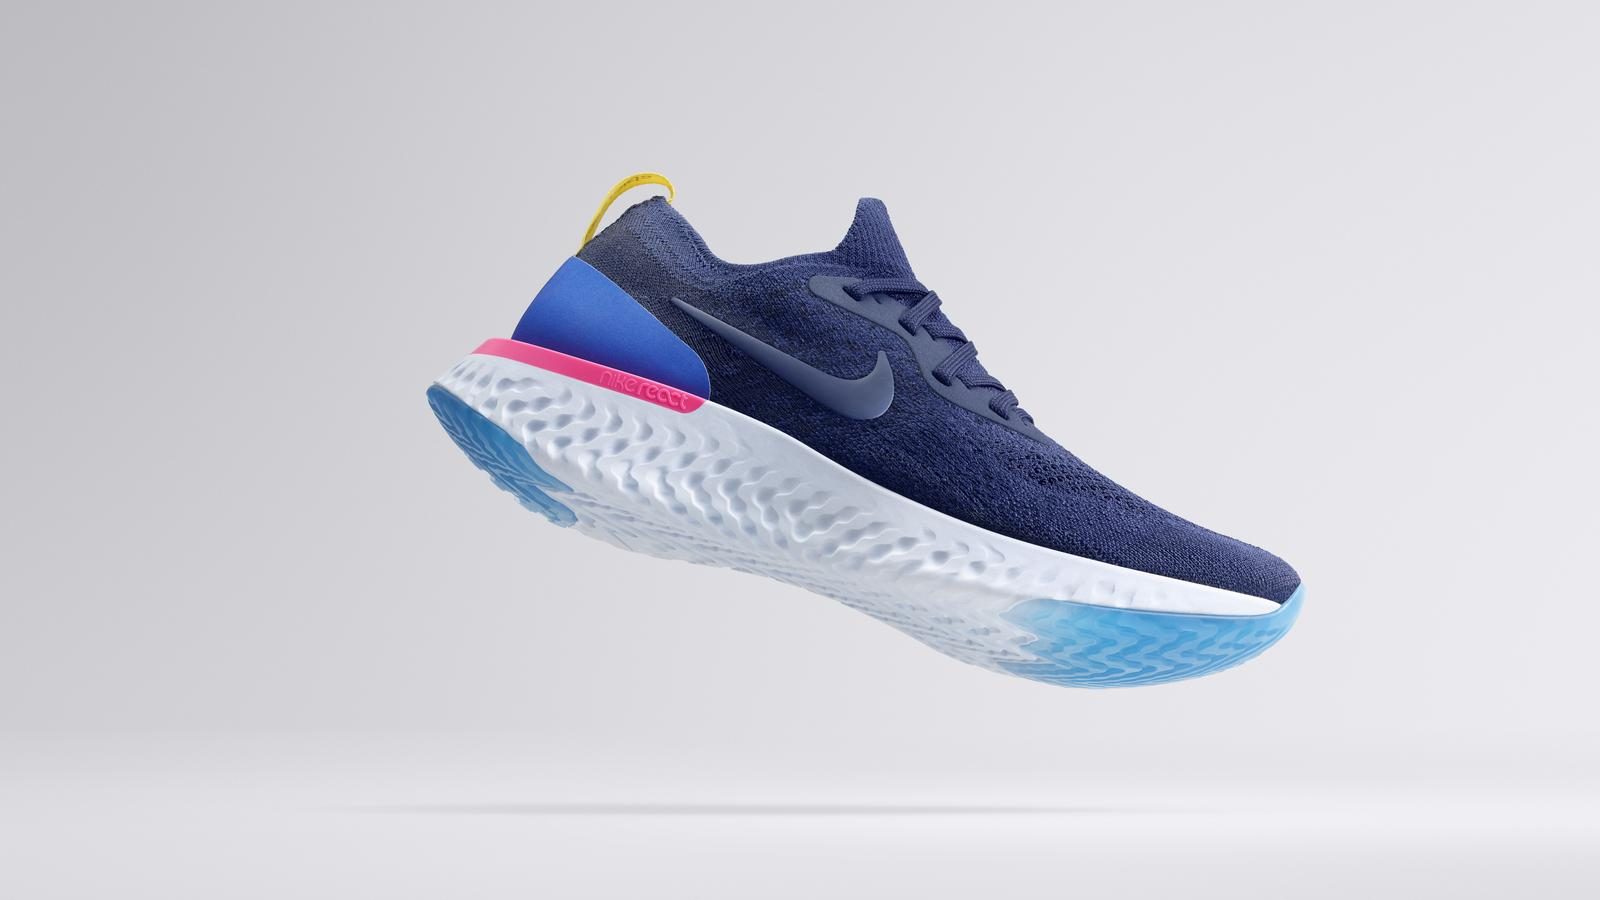 LOOK Nike's new running shoe will put a spring in your step